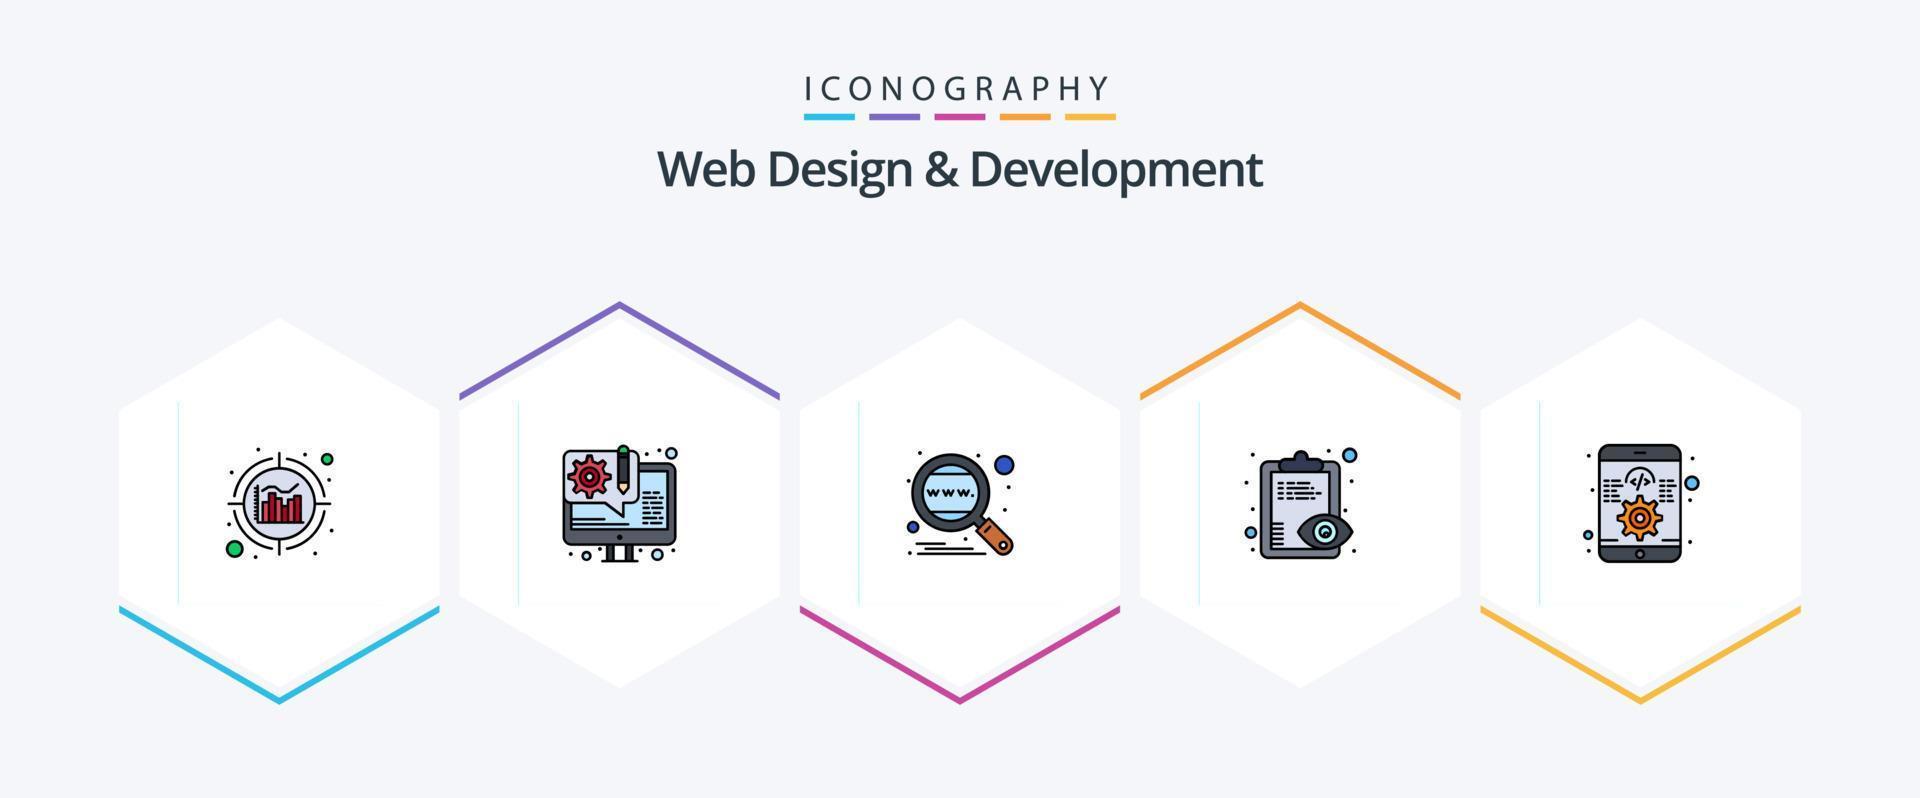 Web Design And Development 25 FilledLine icon pack including app. view. analysis. overview. worldwide vector